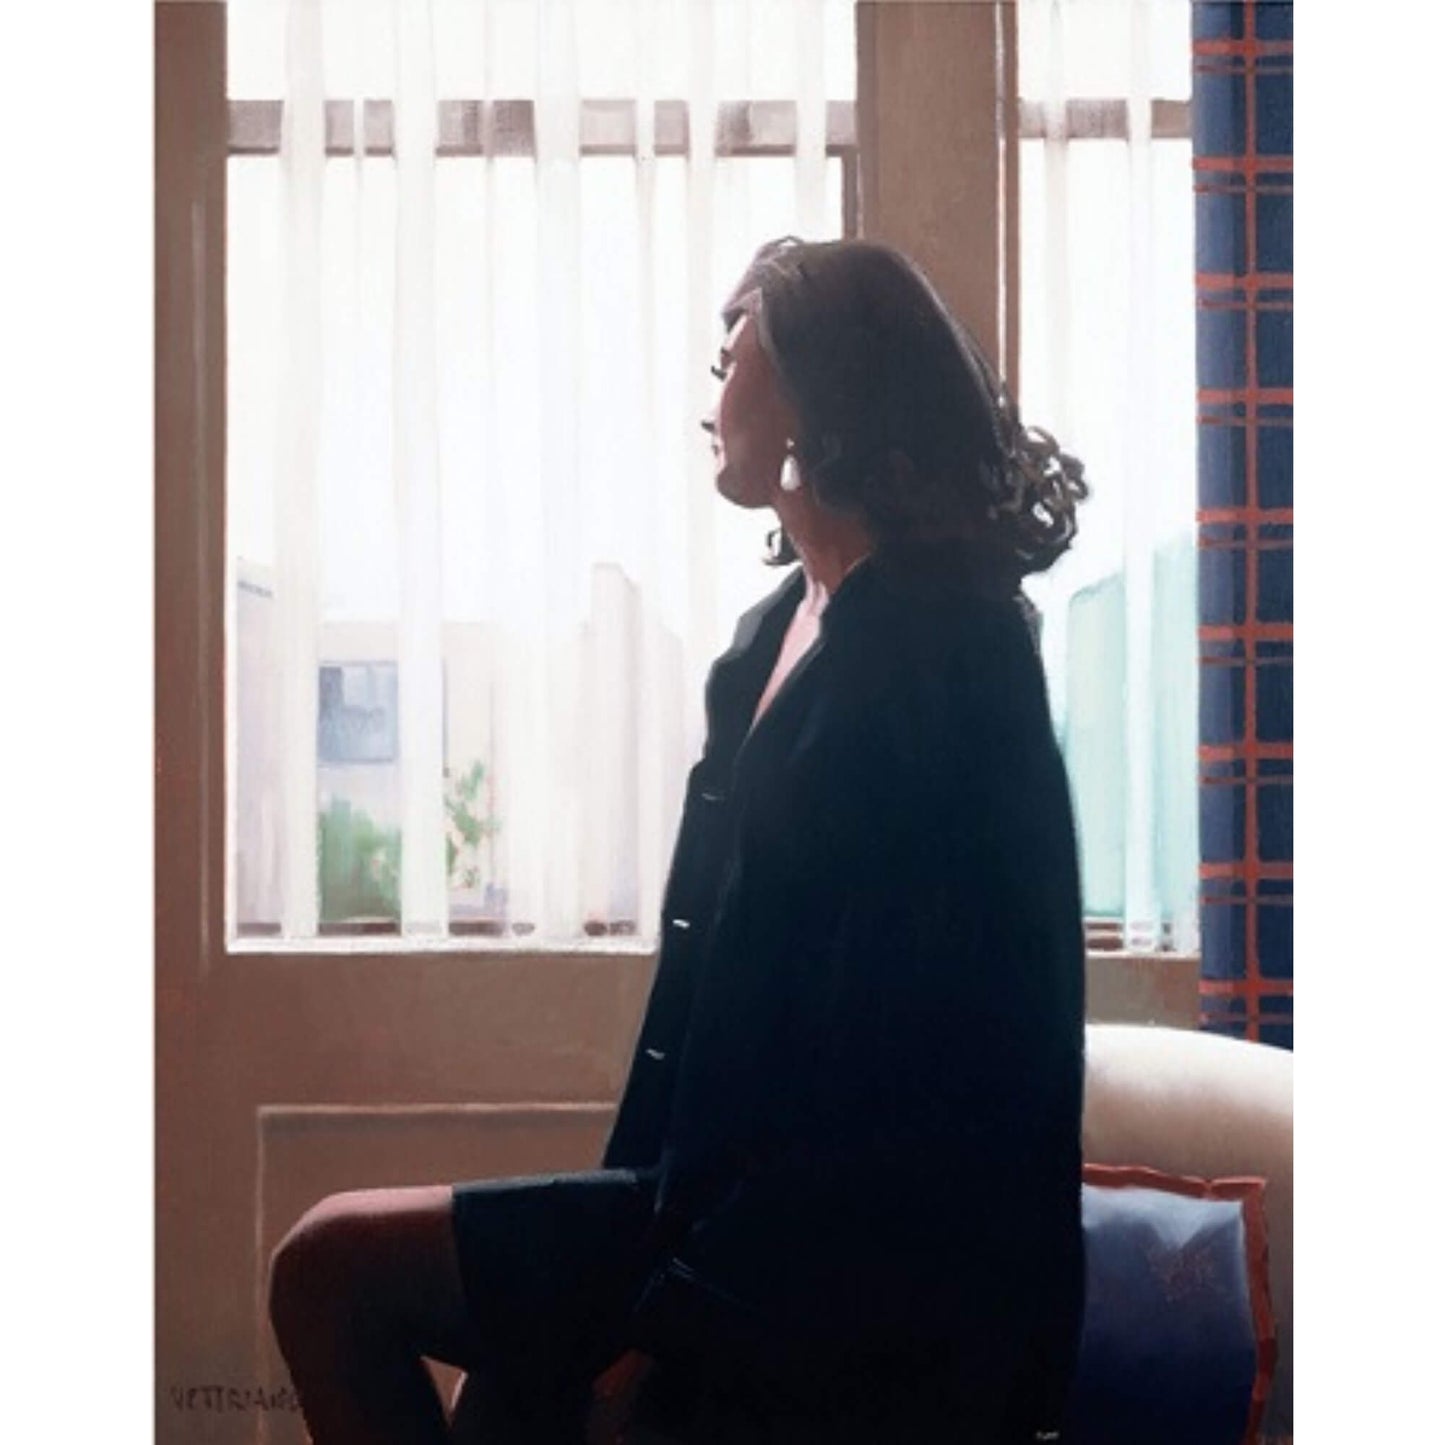 Load image into Gallery viewer, The Very Thought of You - Limited Edition Print - Jack Vettriano
